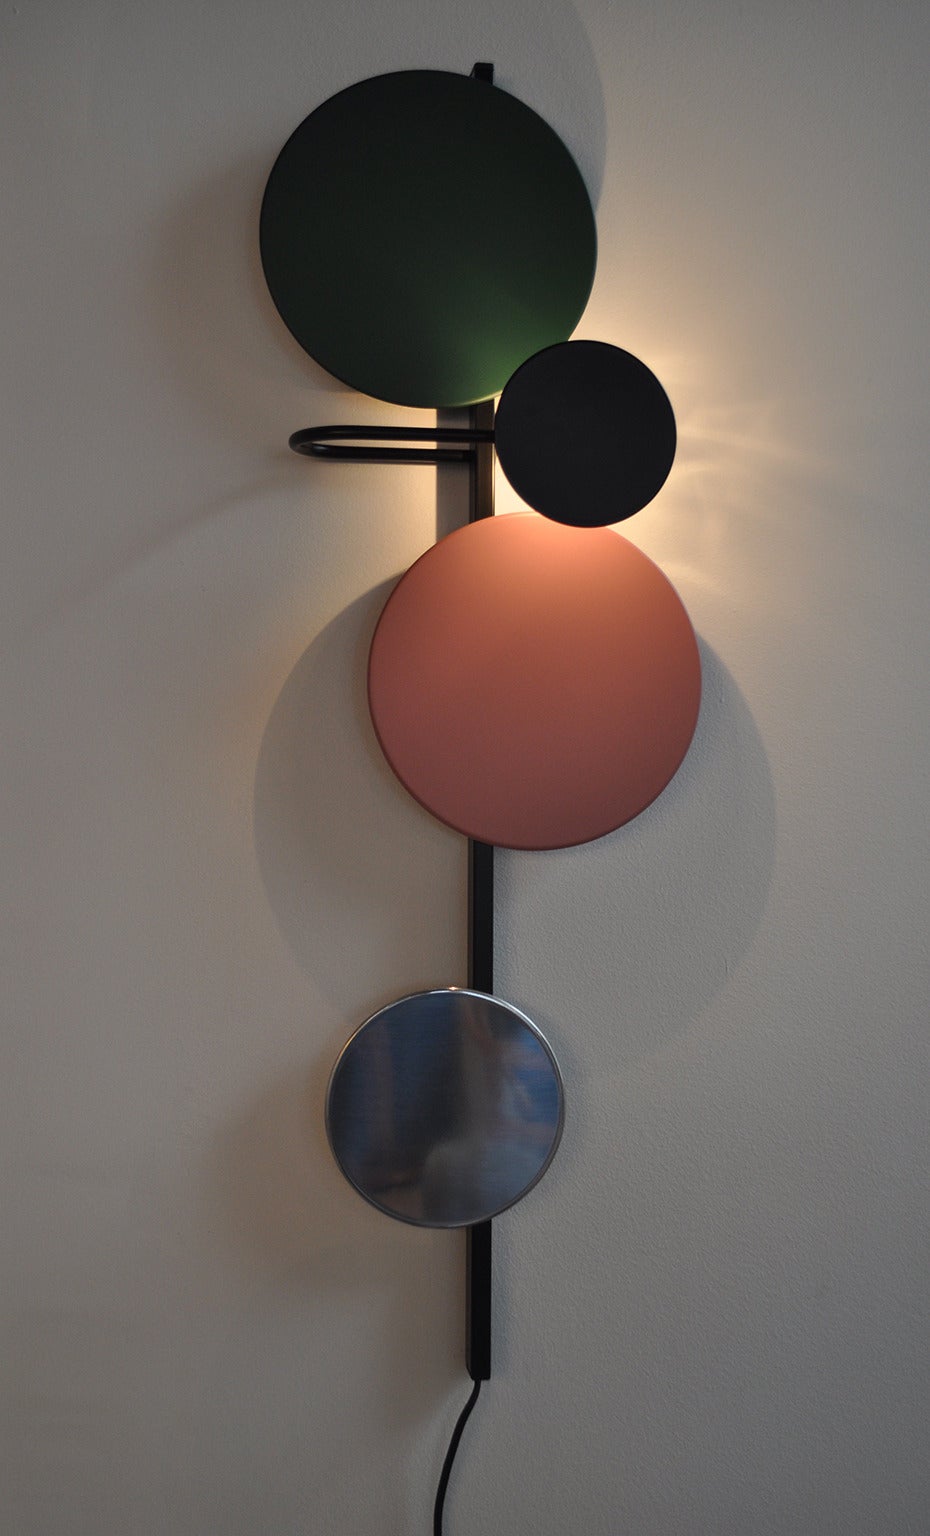 Planet Wall-Mounted Light For Sale at 1stdibs